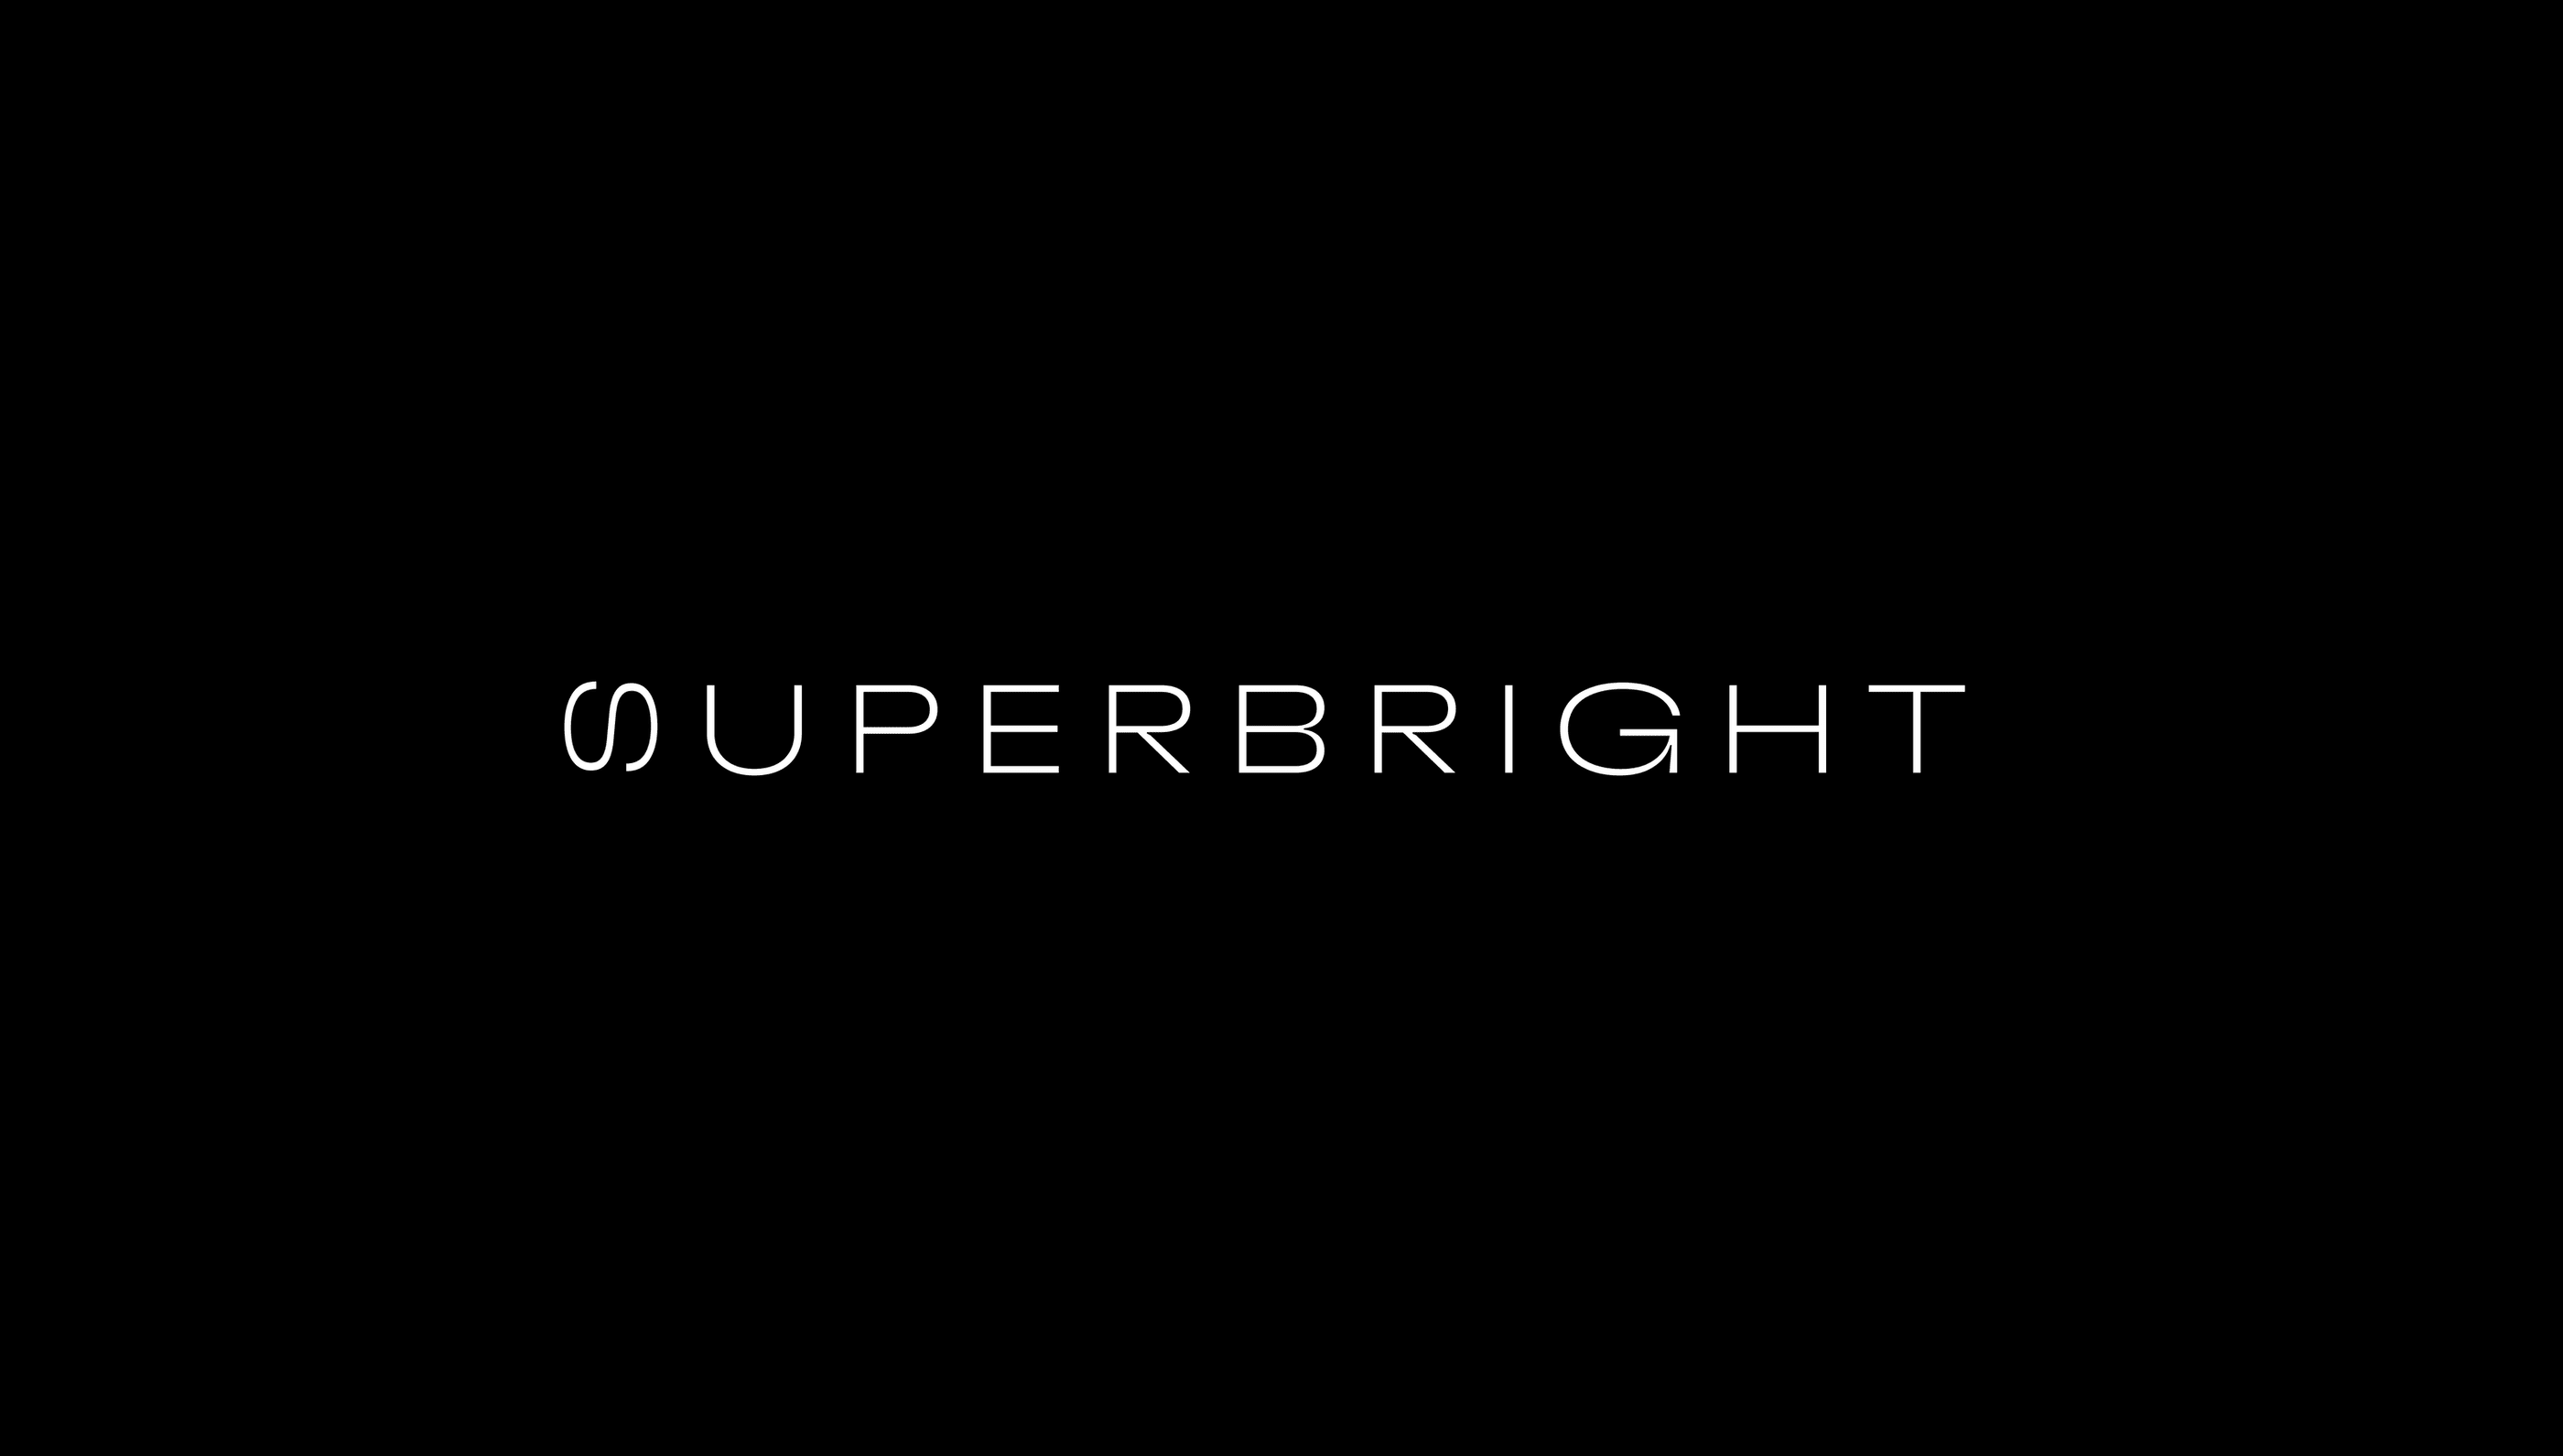 The Superbright logo was constructed on a grid of squares